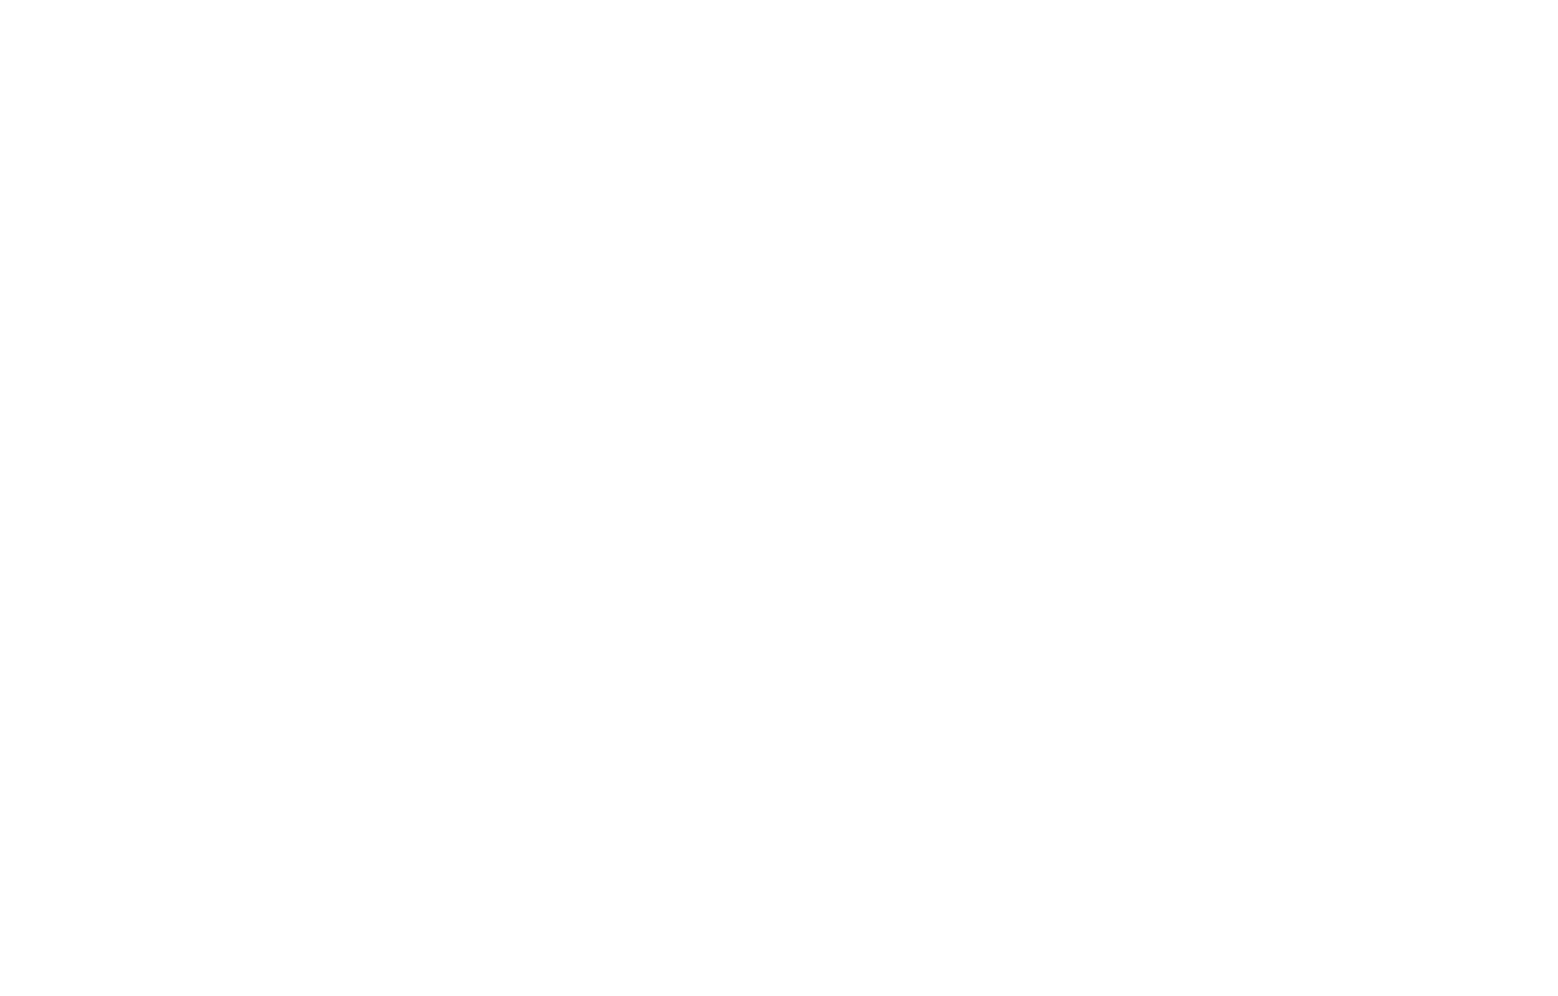 China Yongda Automobiles Services logo for dark backgrounds (transparent PNG)